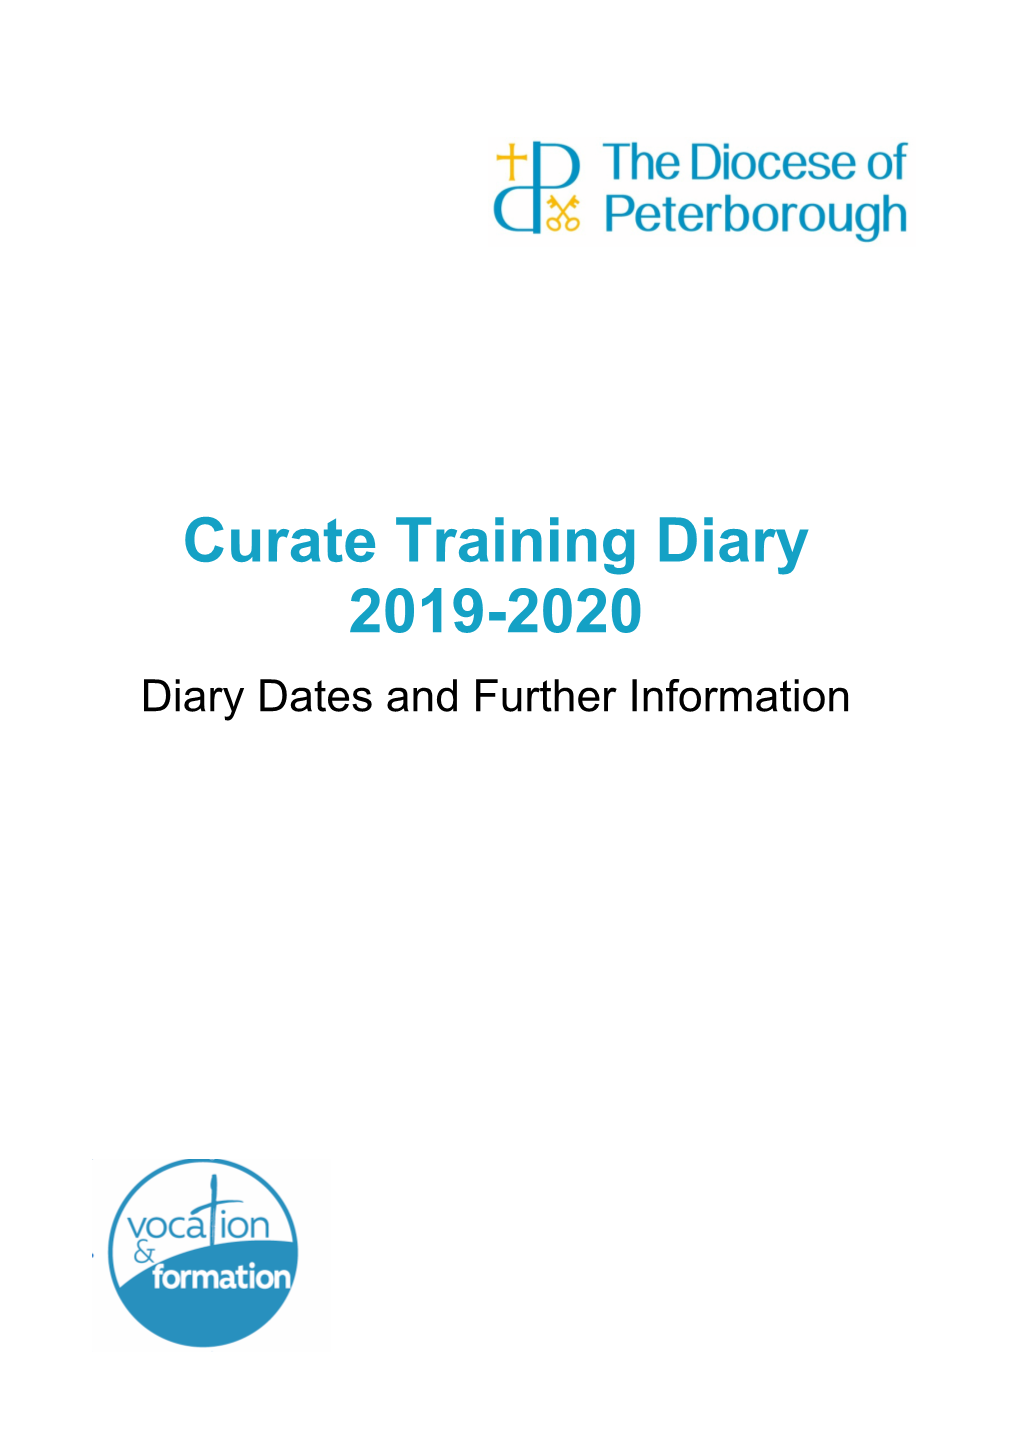 Curate Training Diary with Additional Information 2019-20